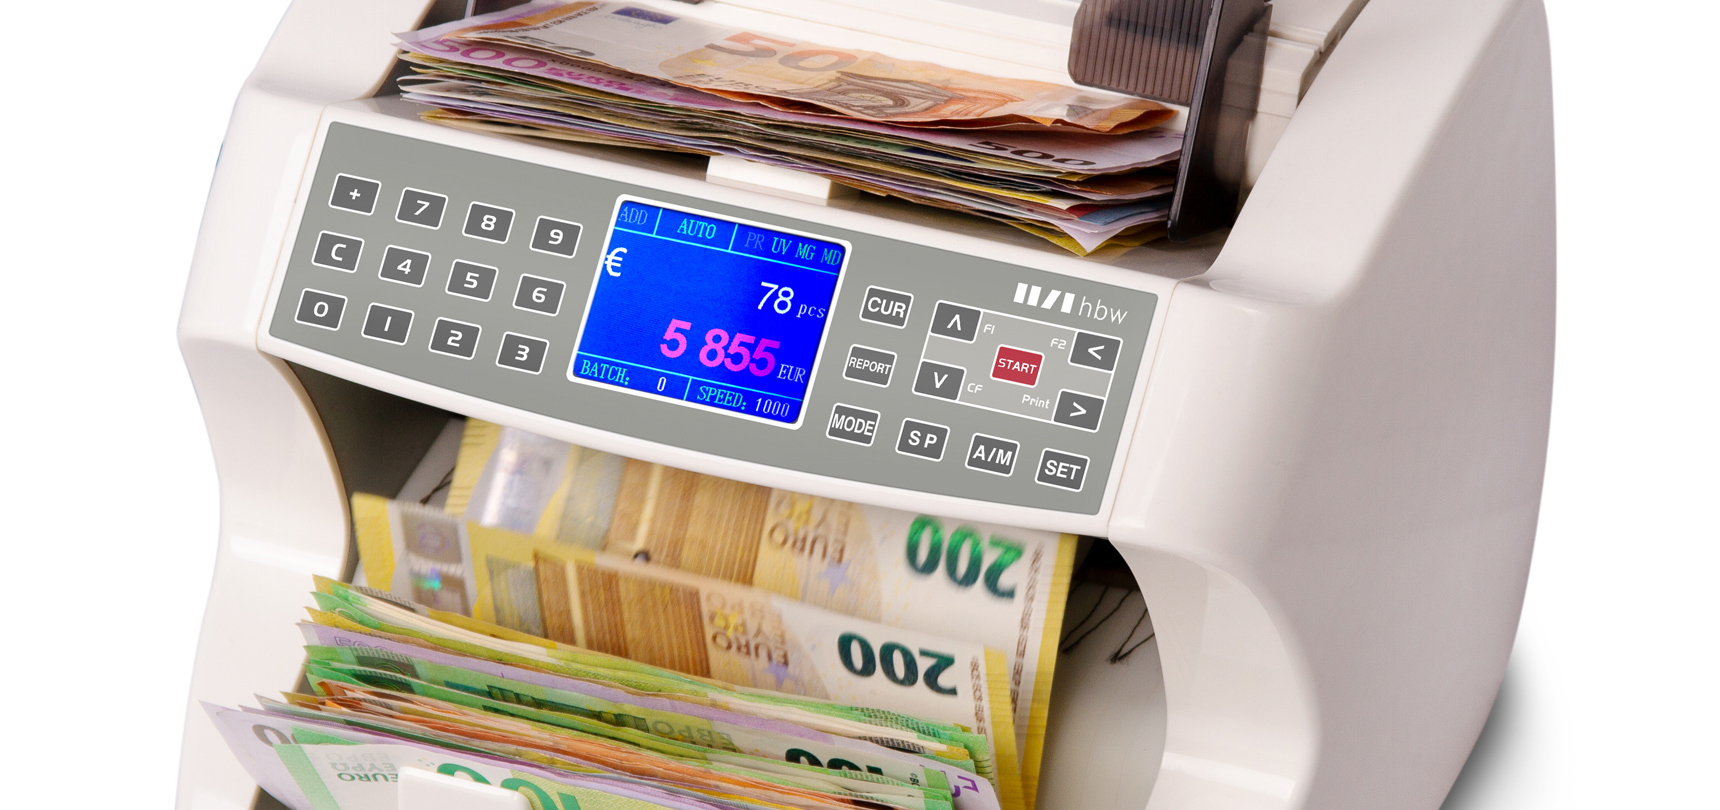 With a banknote counter you can save a lot of time